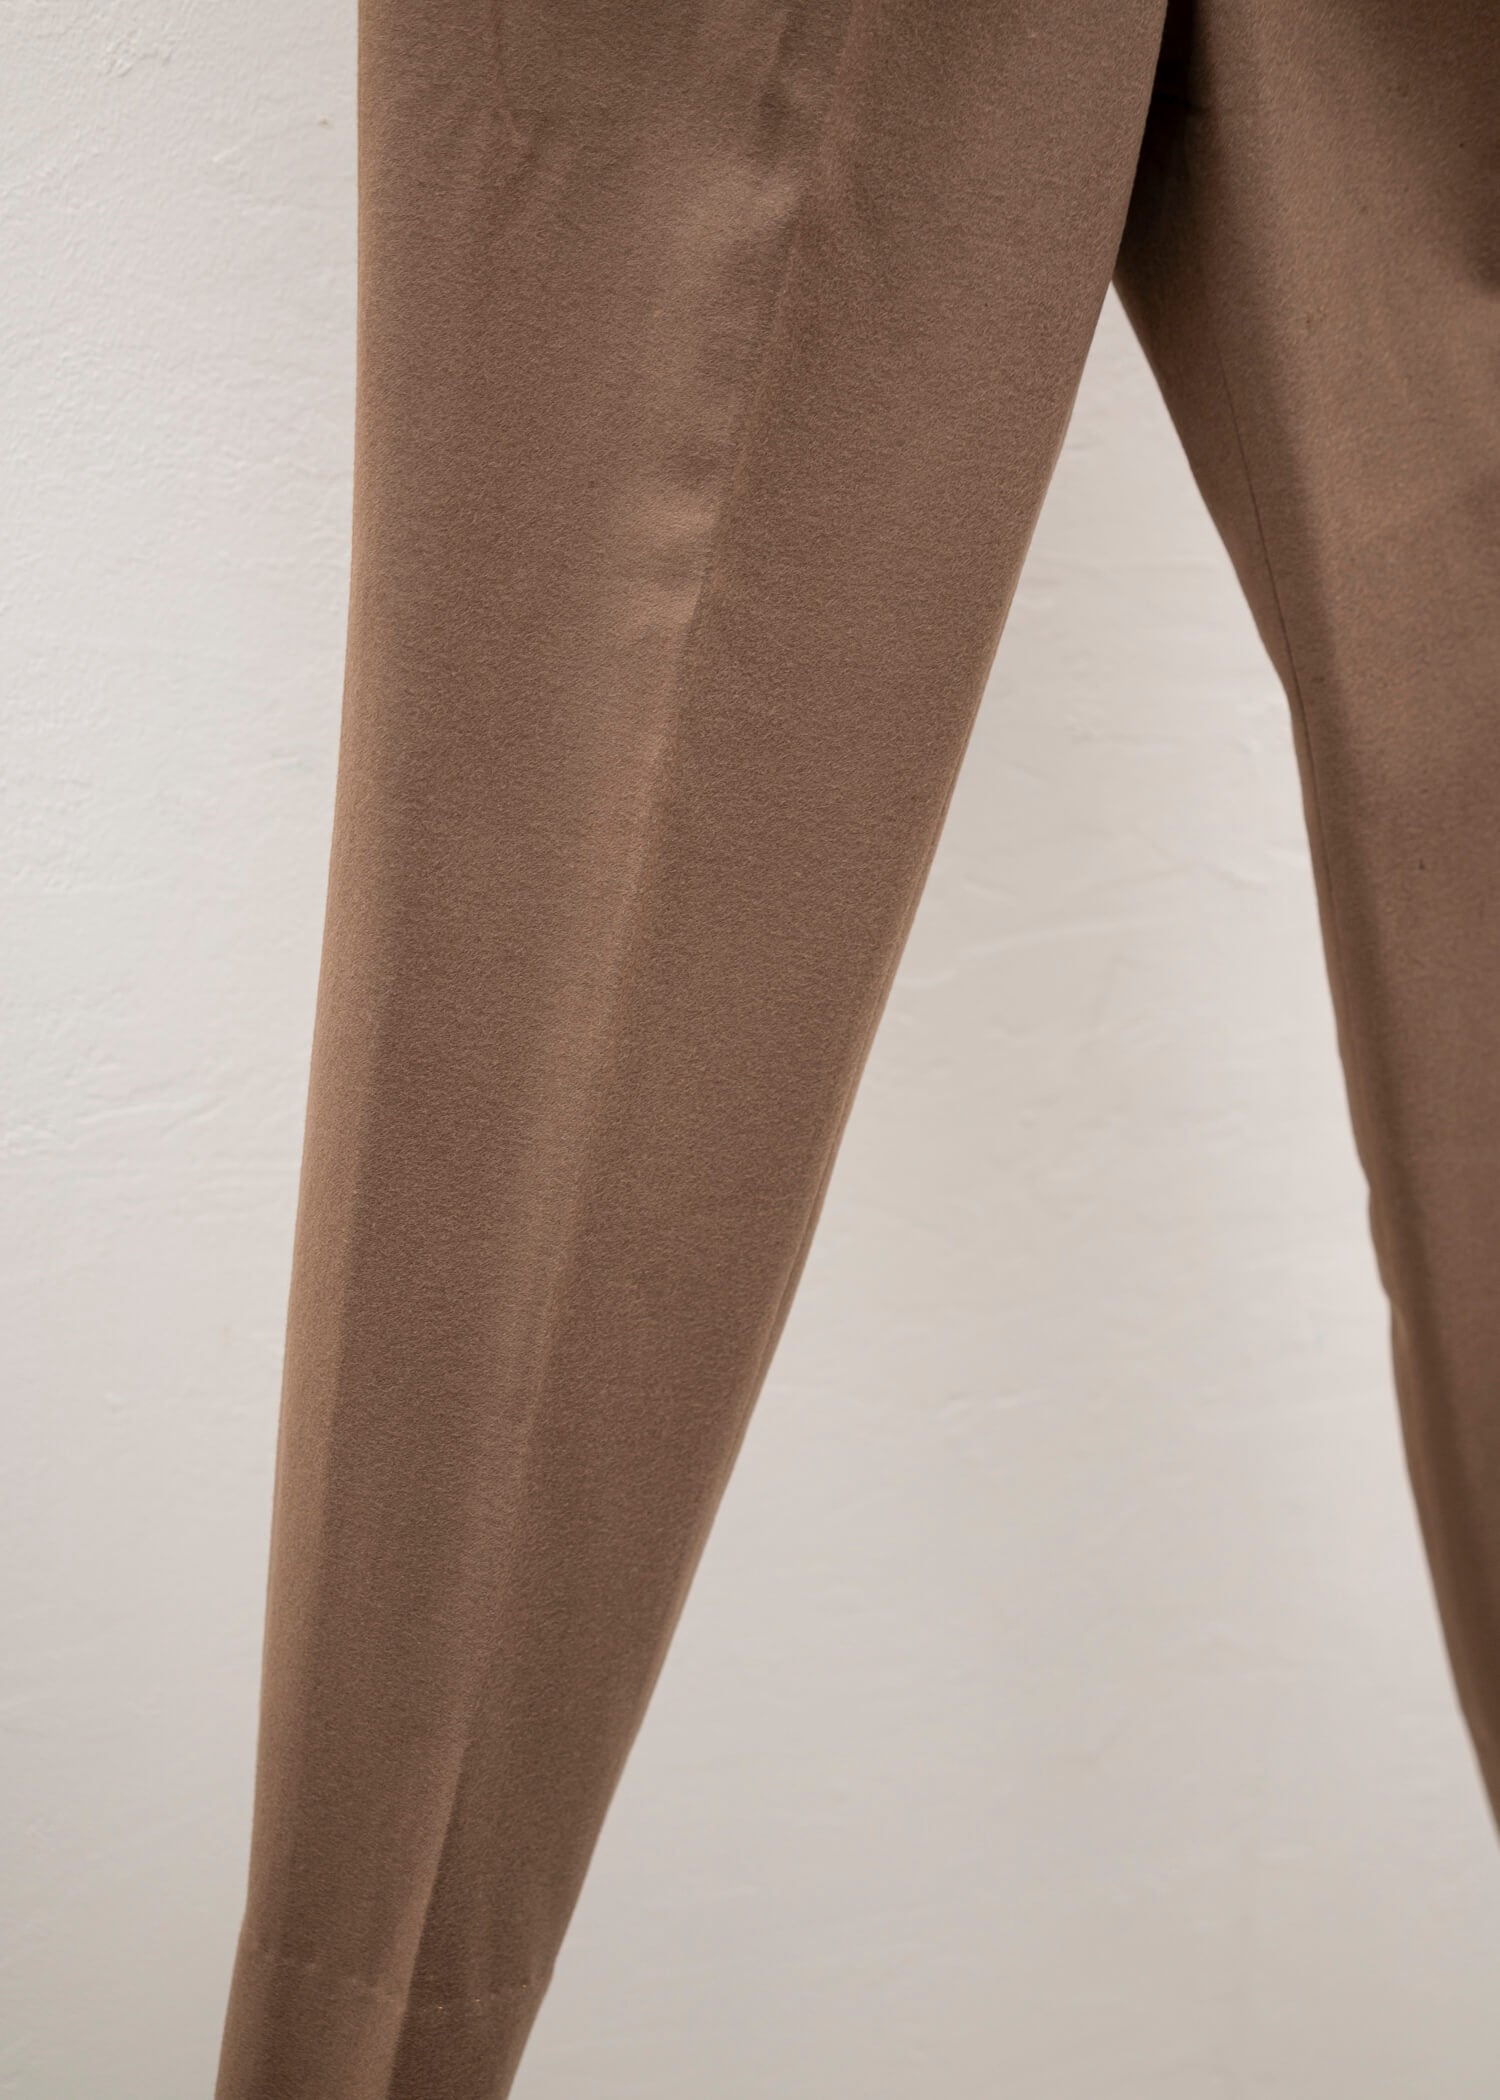 The Crooked Tailor handmade trousers